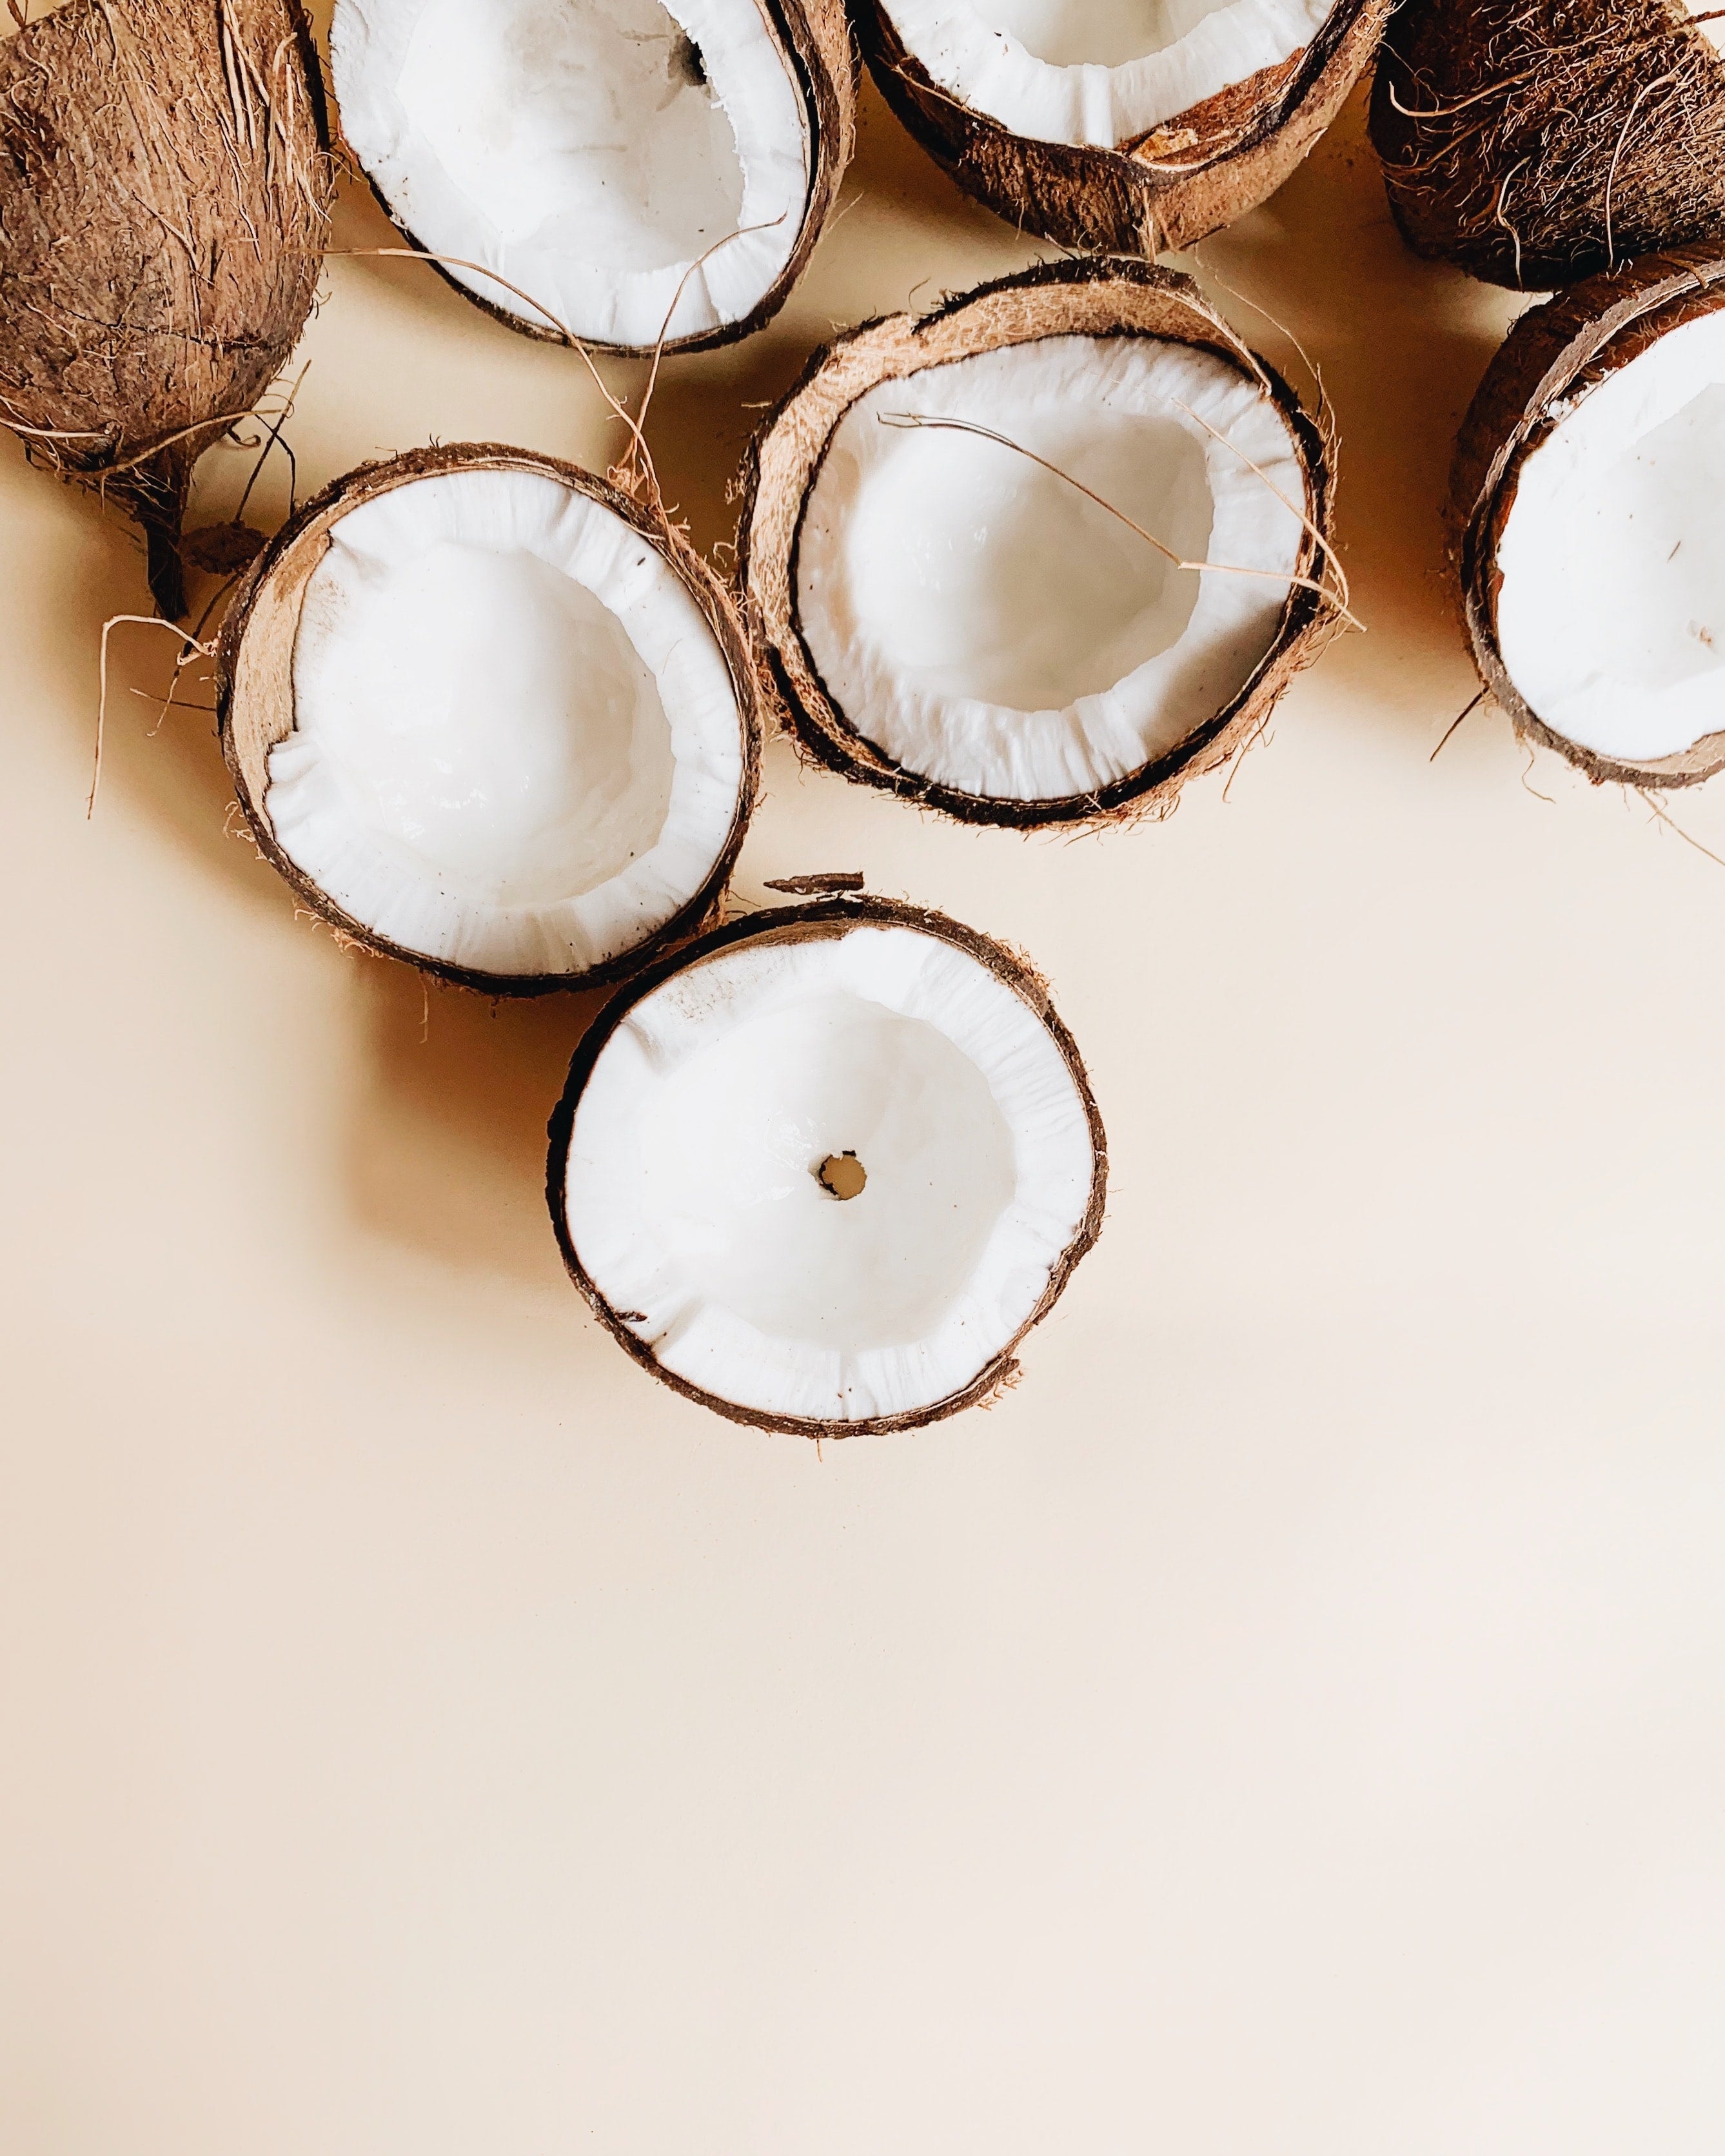 Co-Co-Nuts for MCT's: why we Use MCT Coconut Oil in Our CBD Tinctures